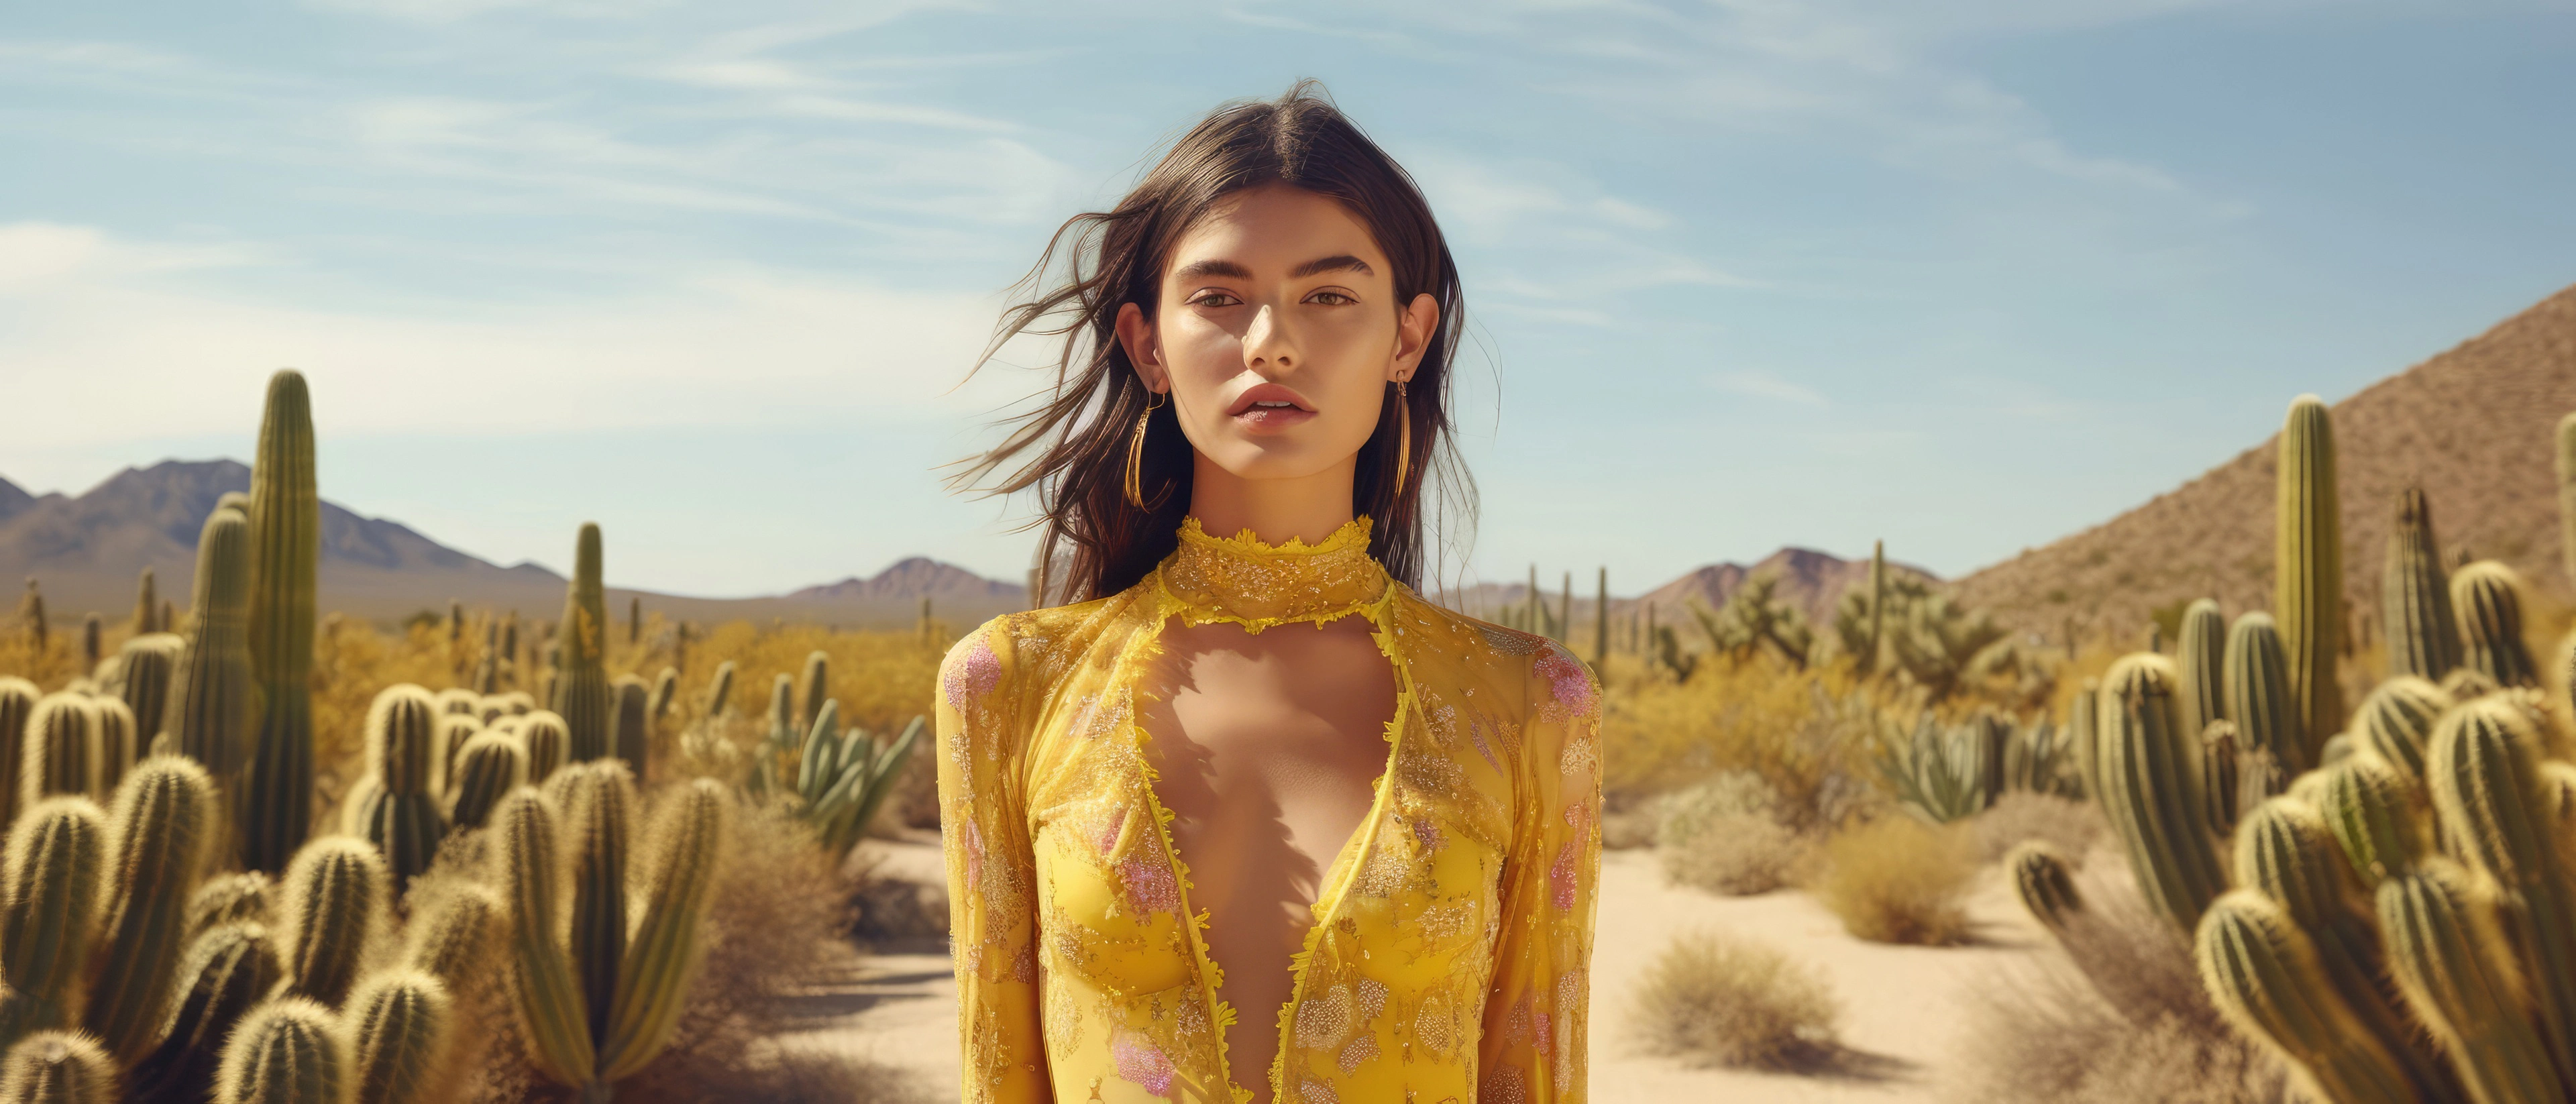 a girl standing alone in the desert wearing a vibrant yellow dress gh.jpg